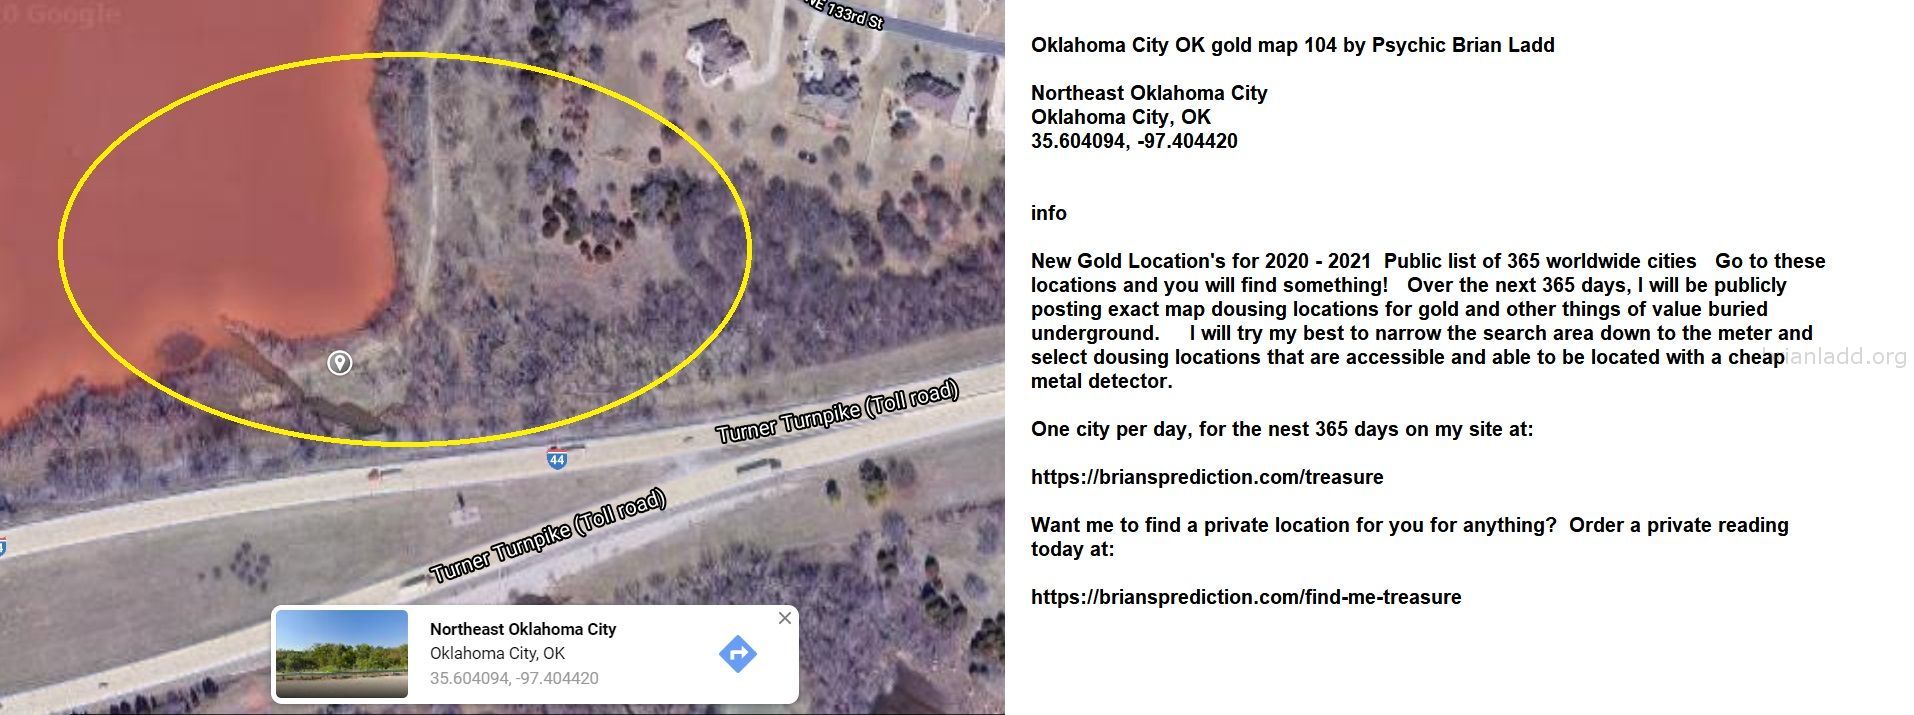 Oklahoma City OK gold map 104 by Psychic Brian Ladd
New Gold Location's for 2020 - 2021  Public list of 365 worldwide cities   Go to these locations and you will find something!   Over the next 365 days, I will be publicly posting exact map dousing locations for gold and other things of value buried underground.     I will try my best to narrow the search area down to the meter and select dousing locations that are accessible and able to be located with a cheap metal detector. One city per day, for the nest 365 days on my site at:  https://briansprediction.com/treasure  Want me to find a private location for you for anything?  Order a private reading today at:  https://briansprediction.com/find-me-treasure
